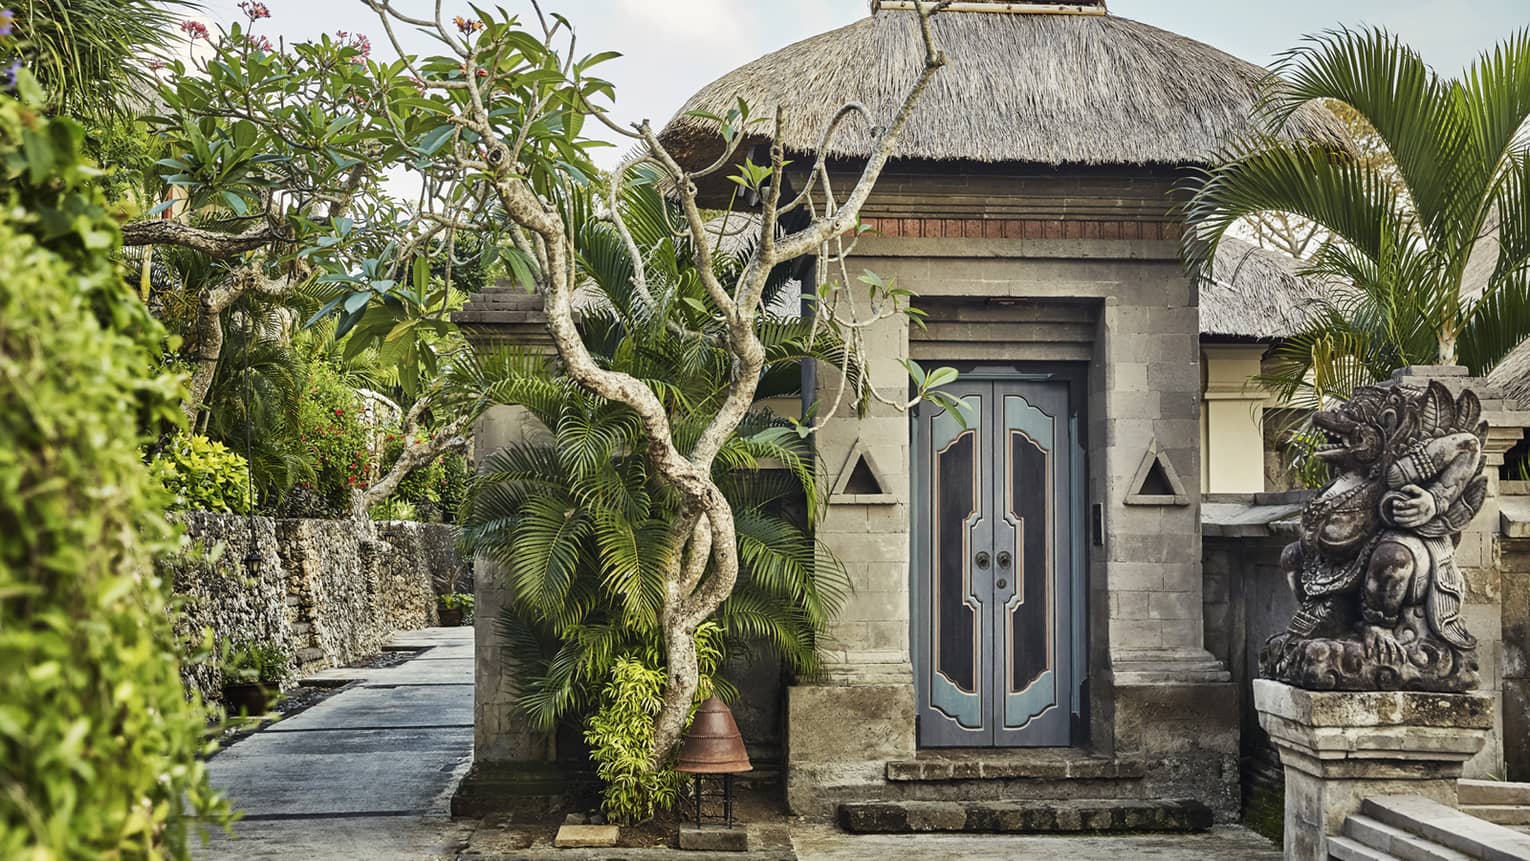 Stone wall, steps by tall rustic blue door under thatched roof, twisted tropical trees